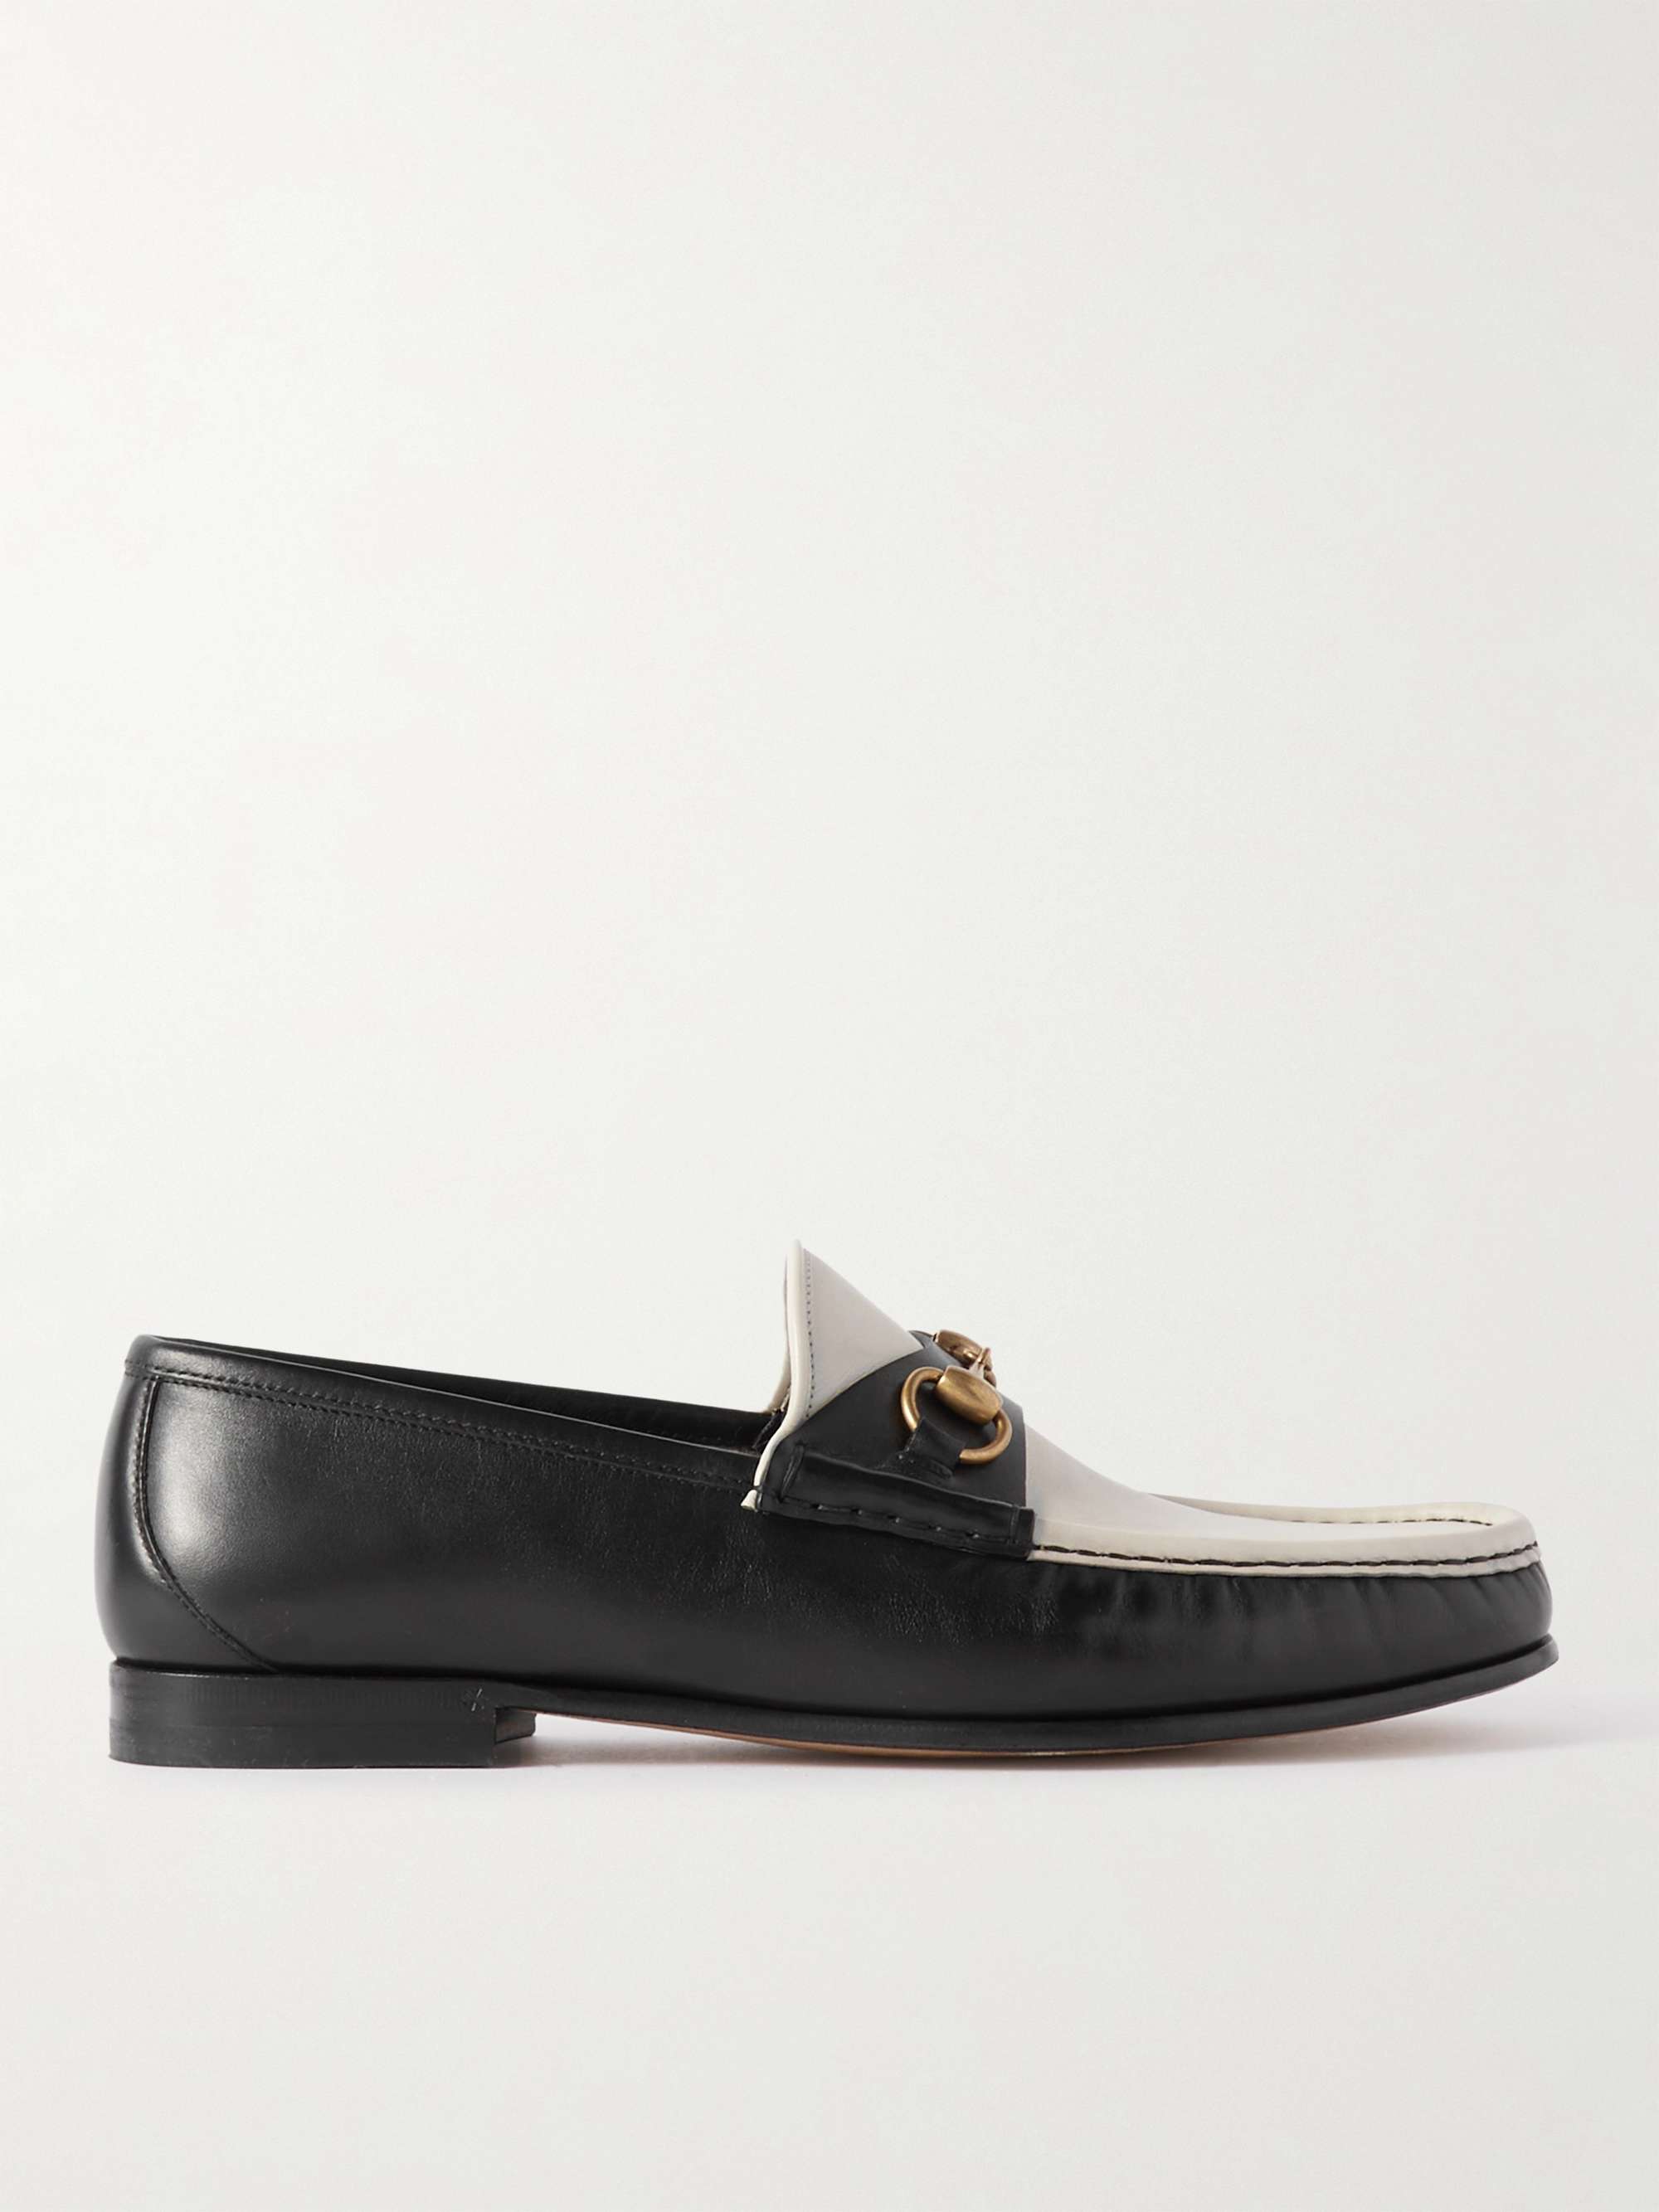 GUCCI Horsebit Two-Tone Leather Loafers | MR PORTER